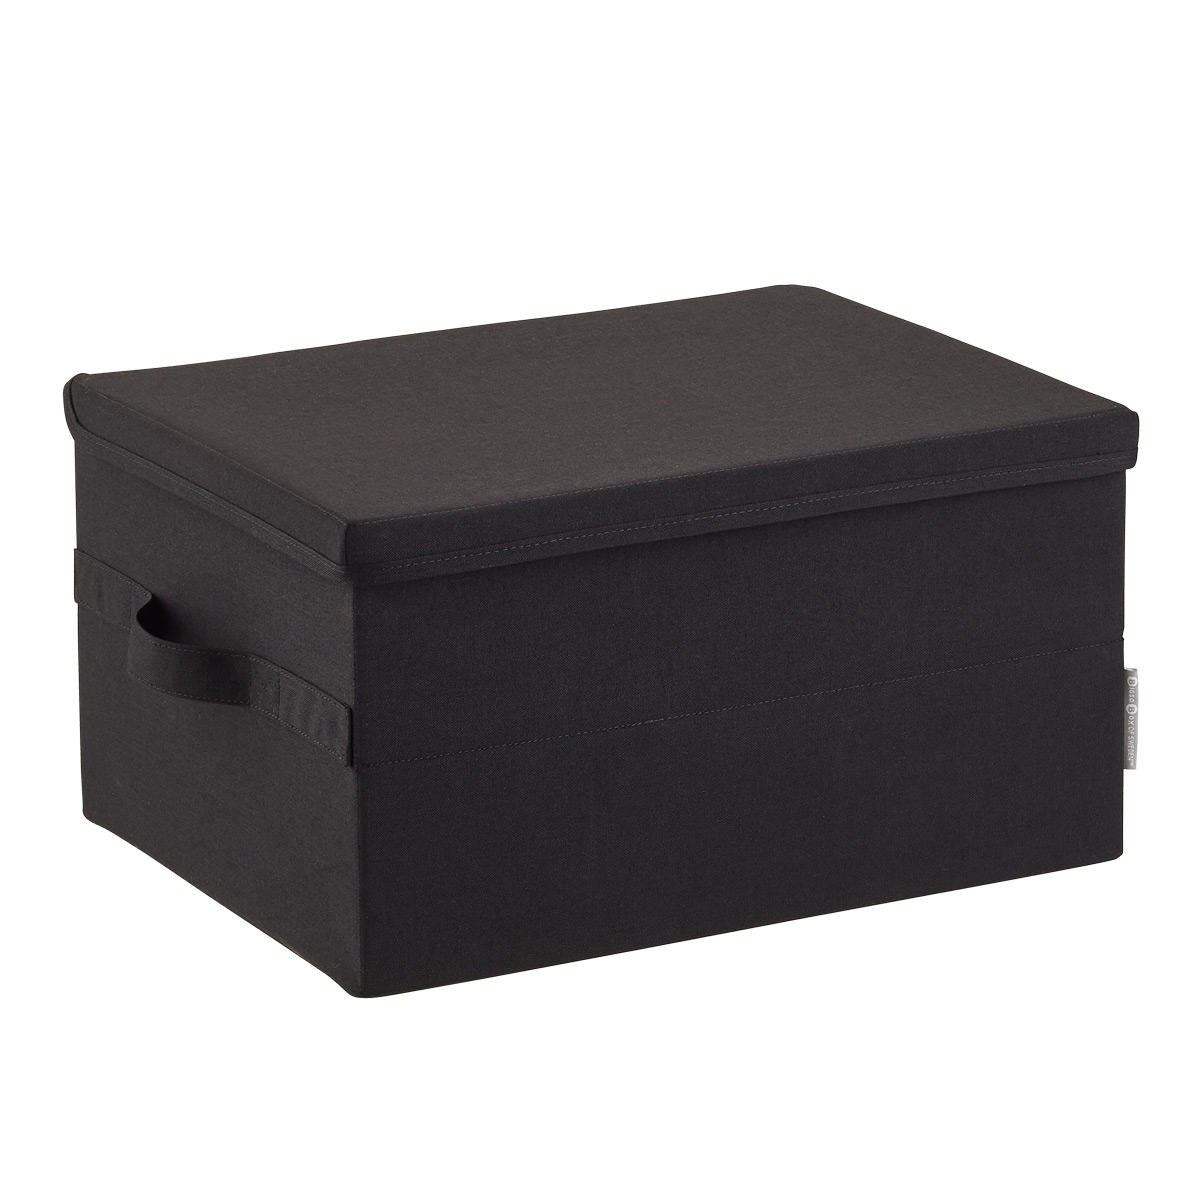 https://www.containerstore.com/catalogimages/417741/10084713-Bigso-fabric-storage-box-la.jpg